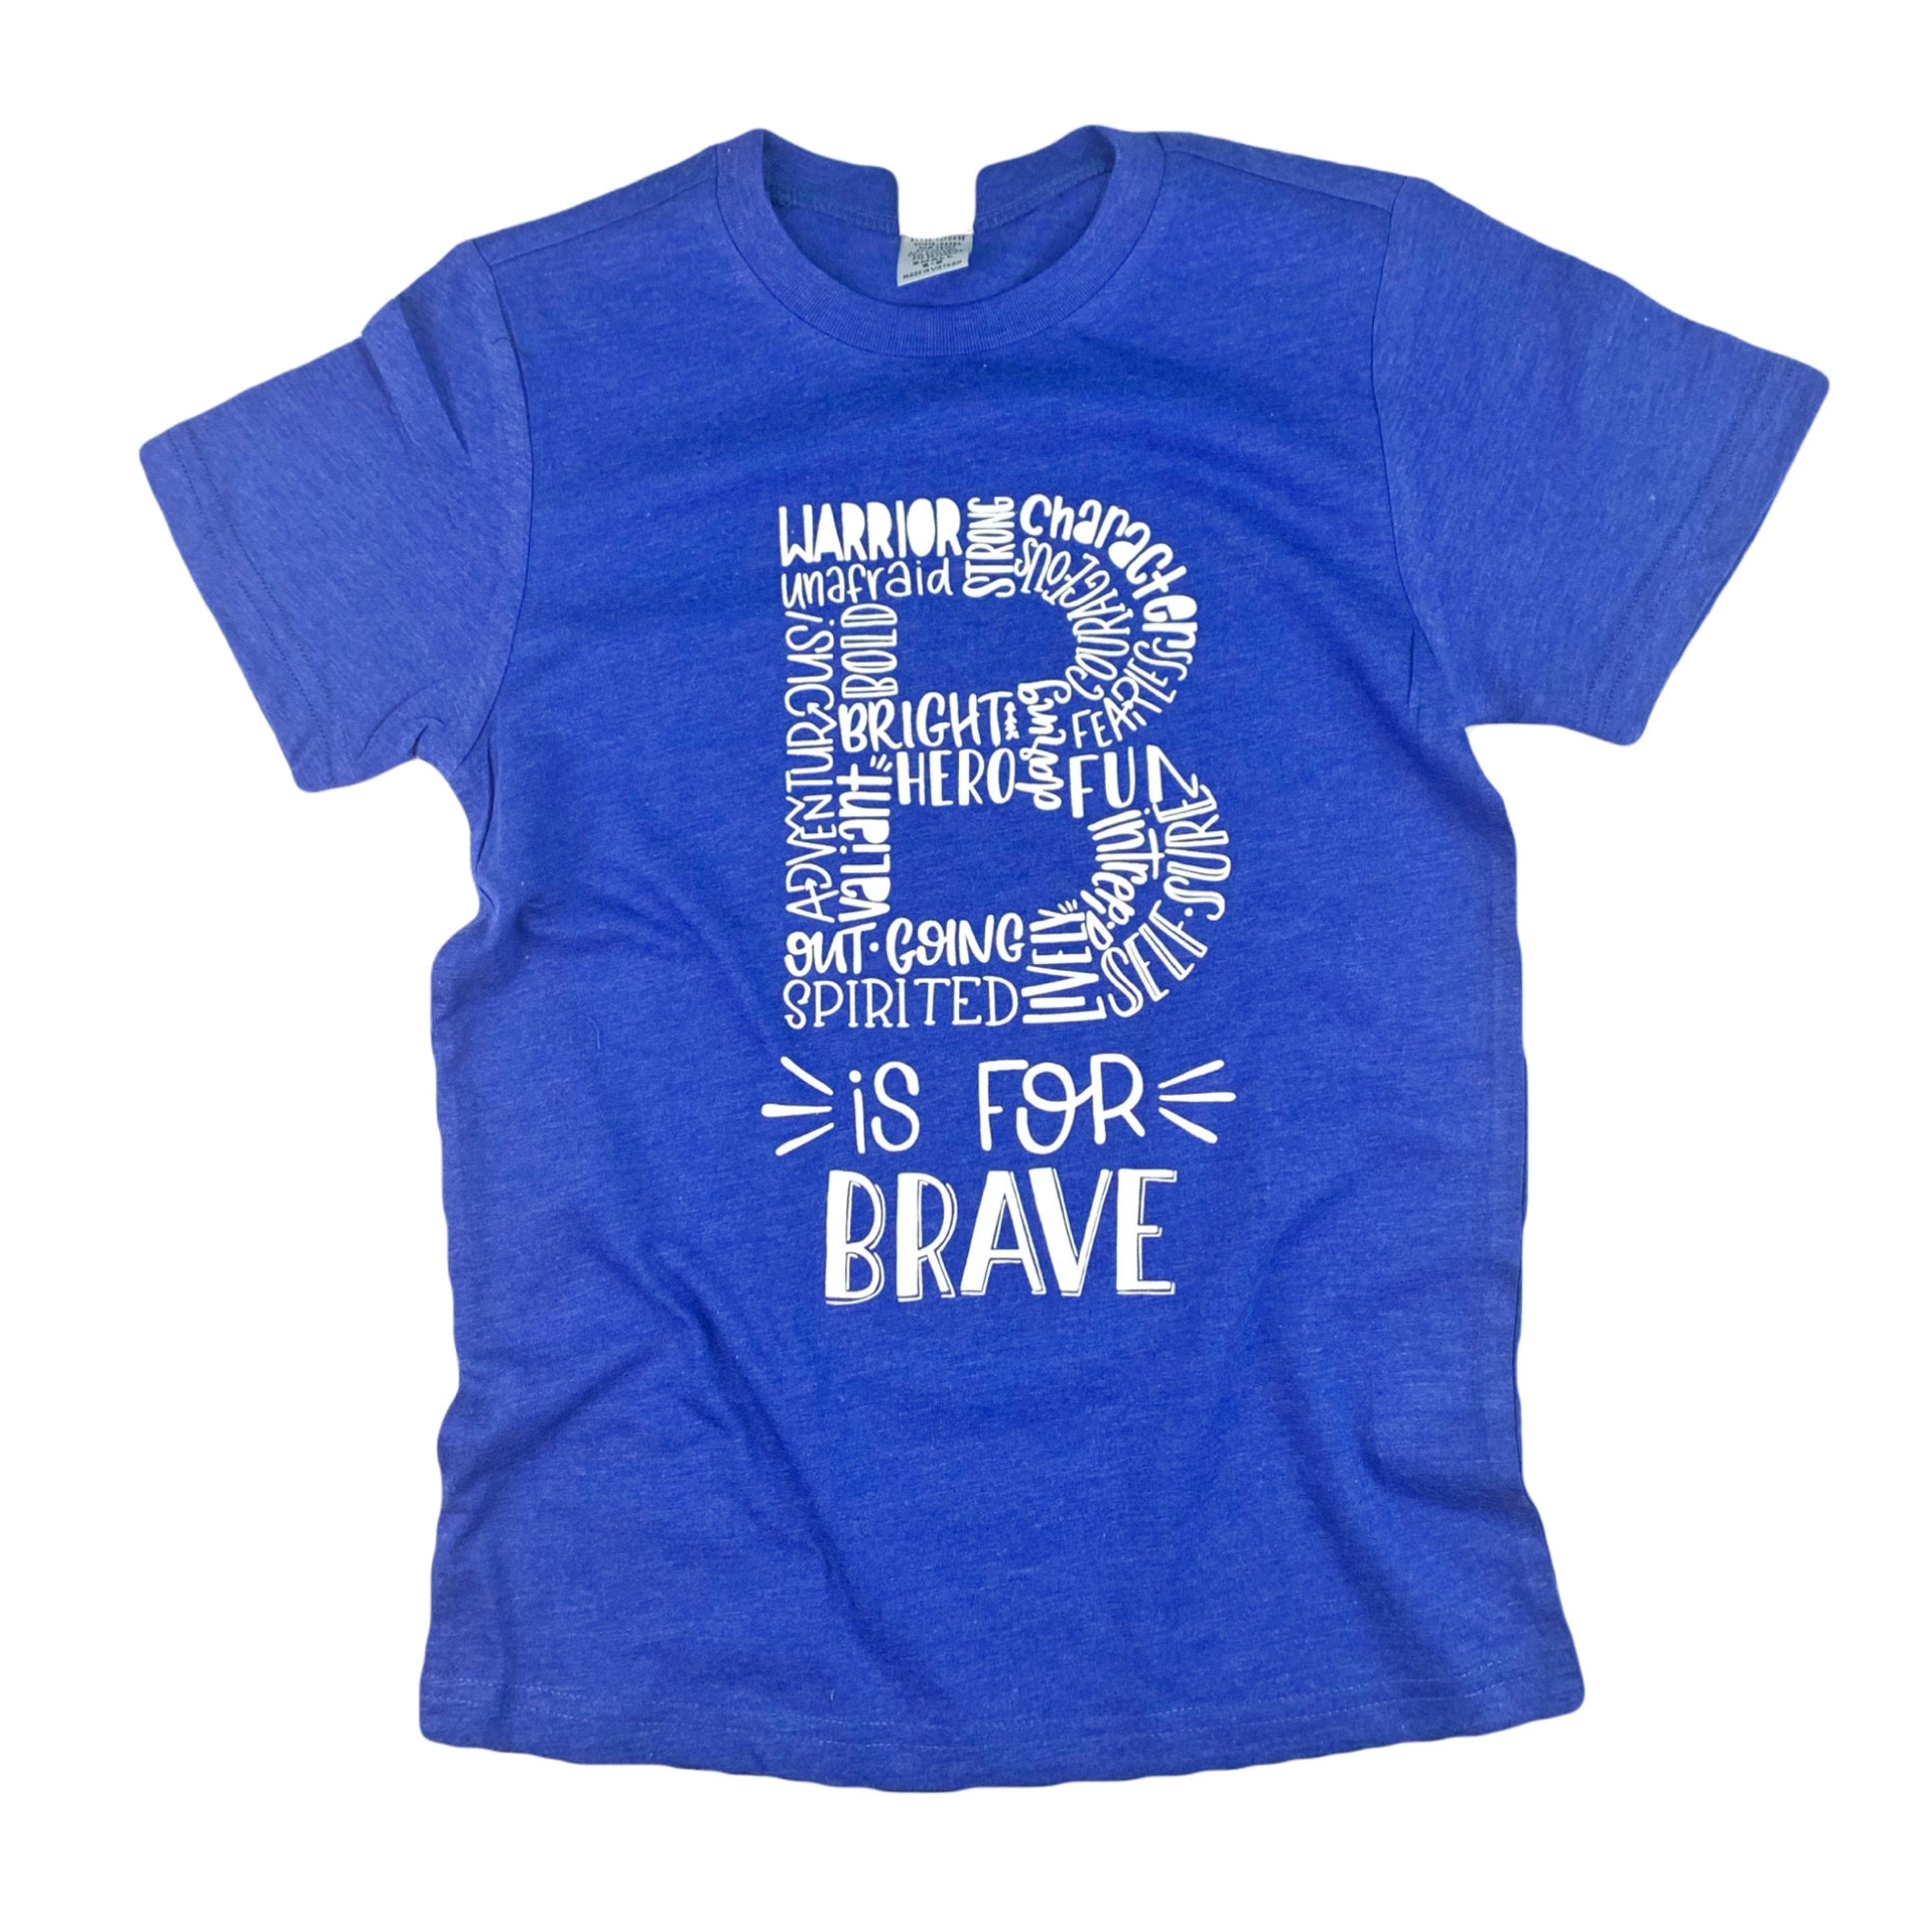 B is for Brave – TBE Apparel